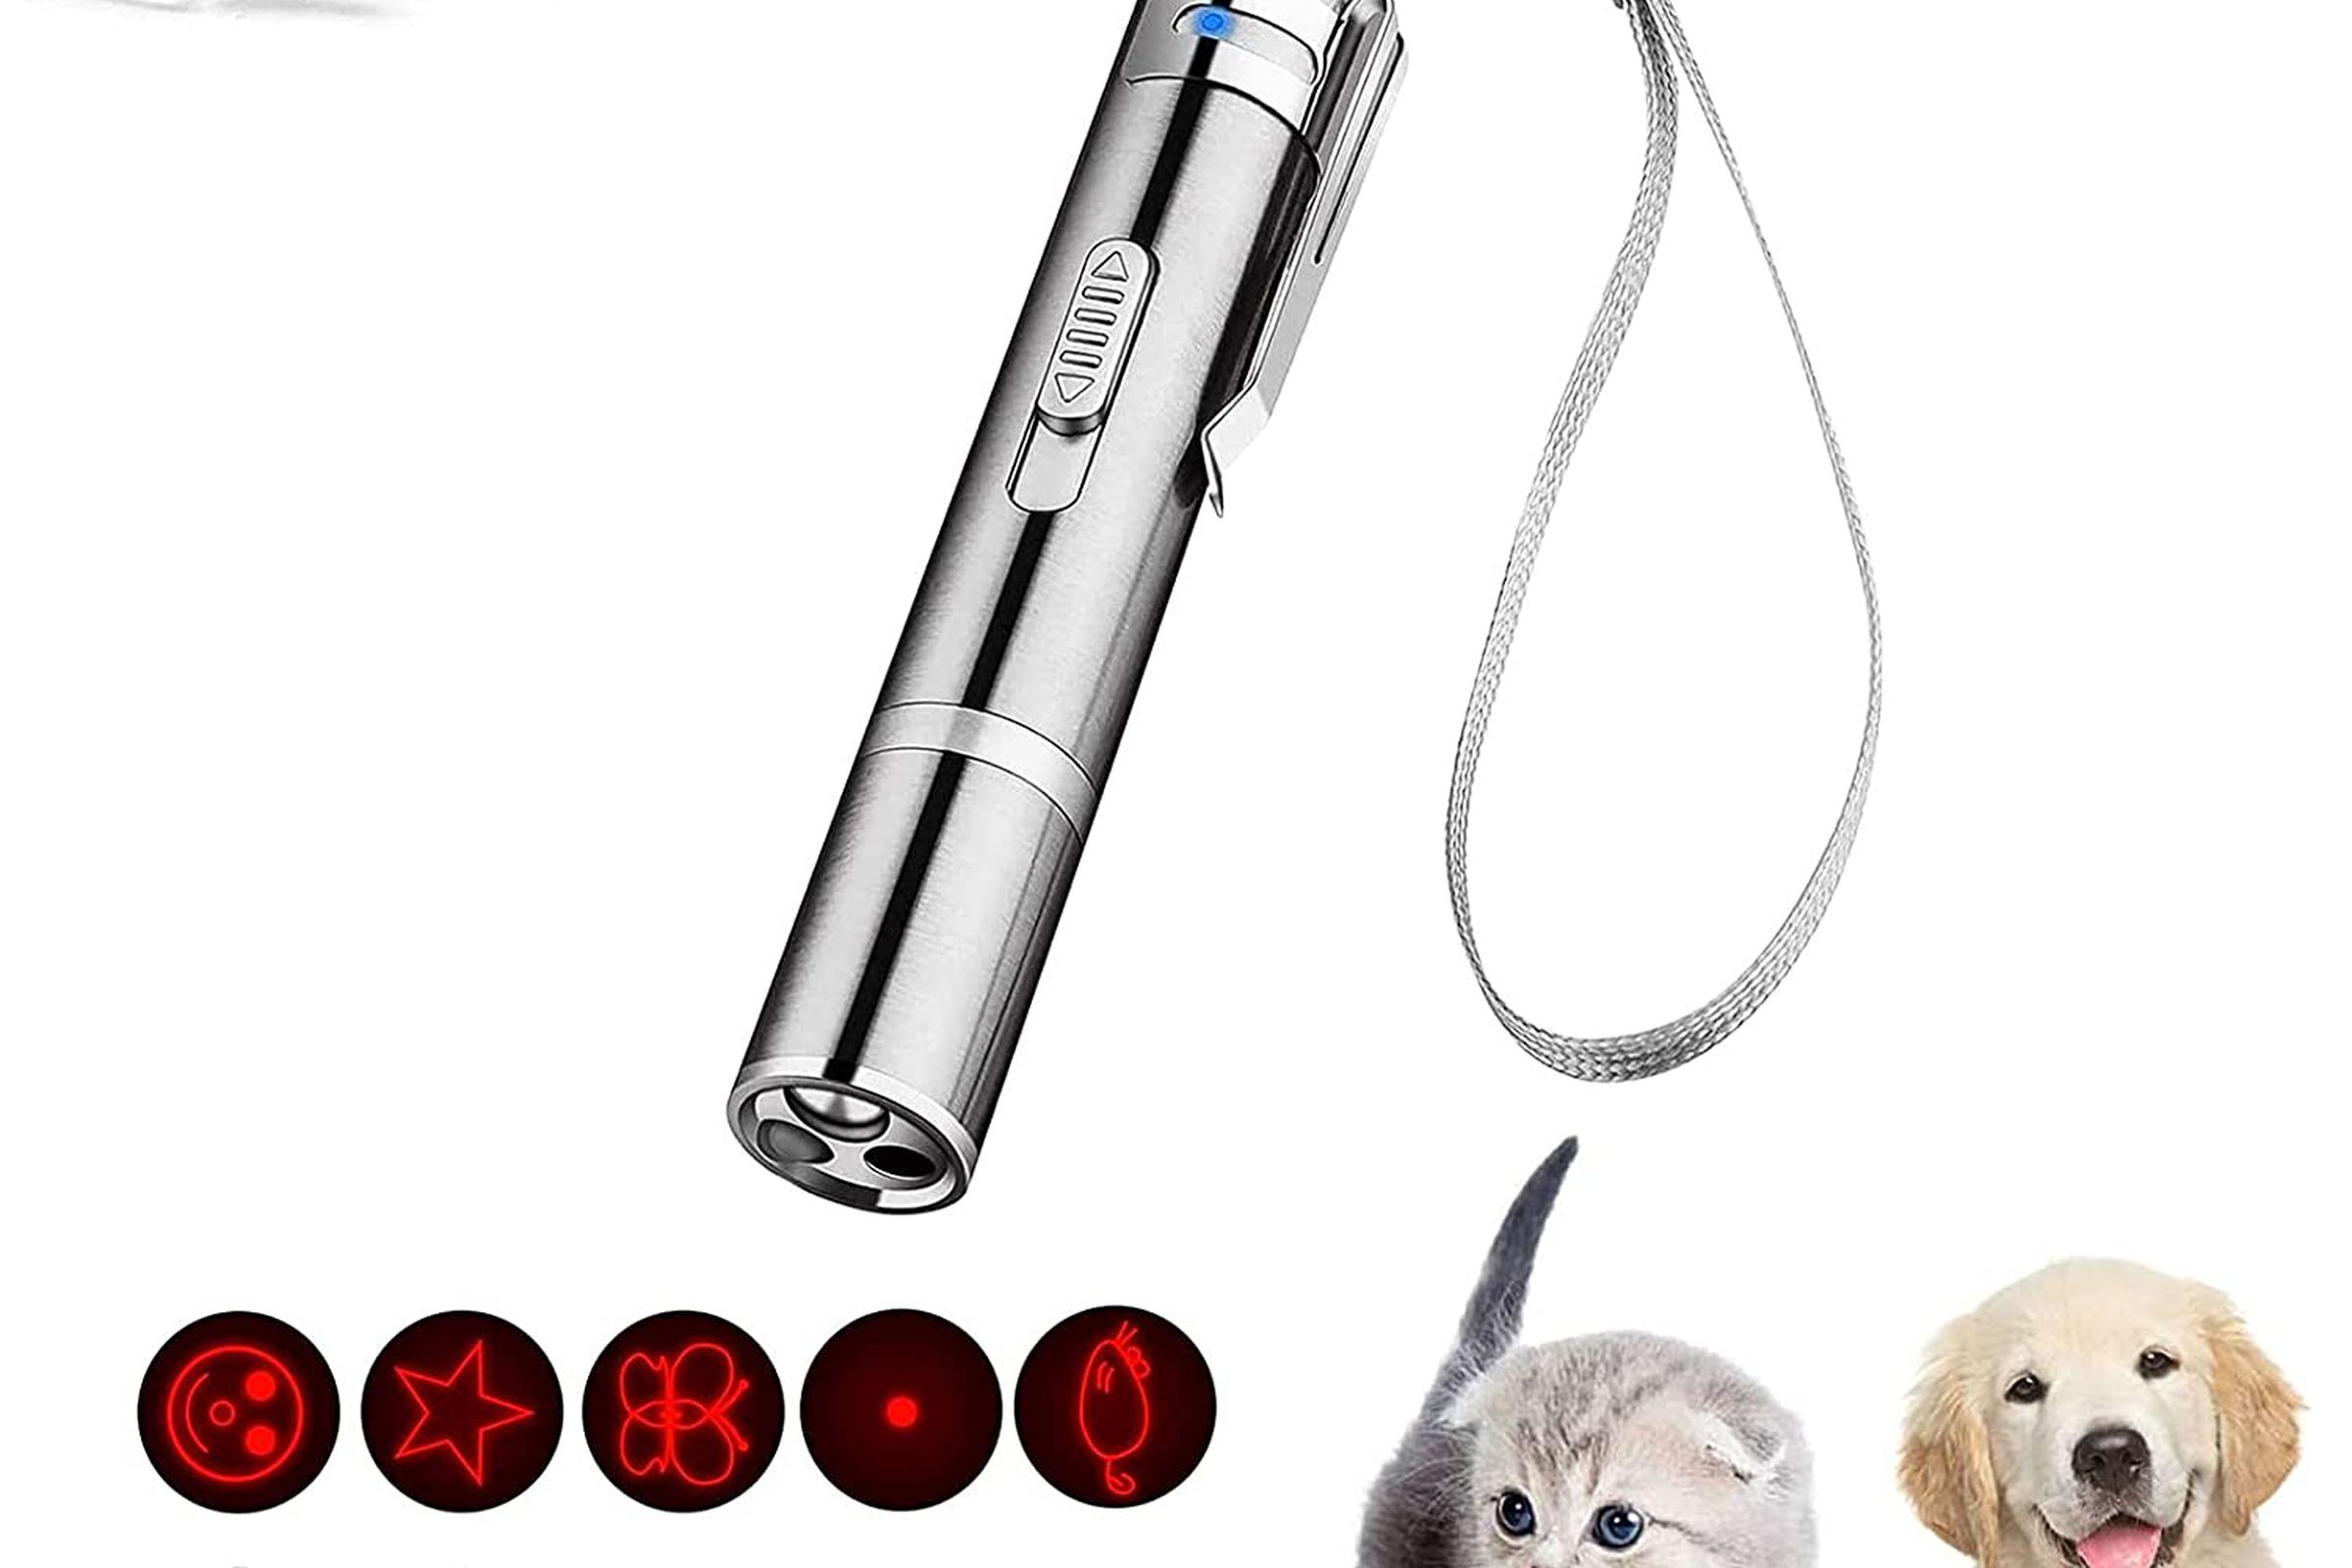 long, silver laser cat toy with available patterns shown on the lower left, and a puppy and kitten on the lower right.